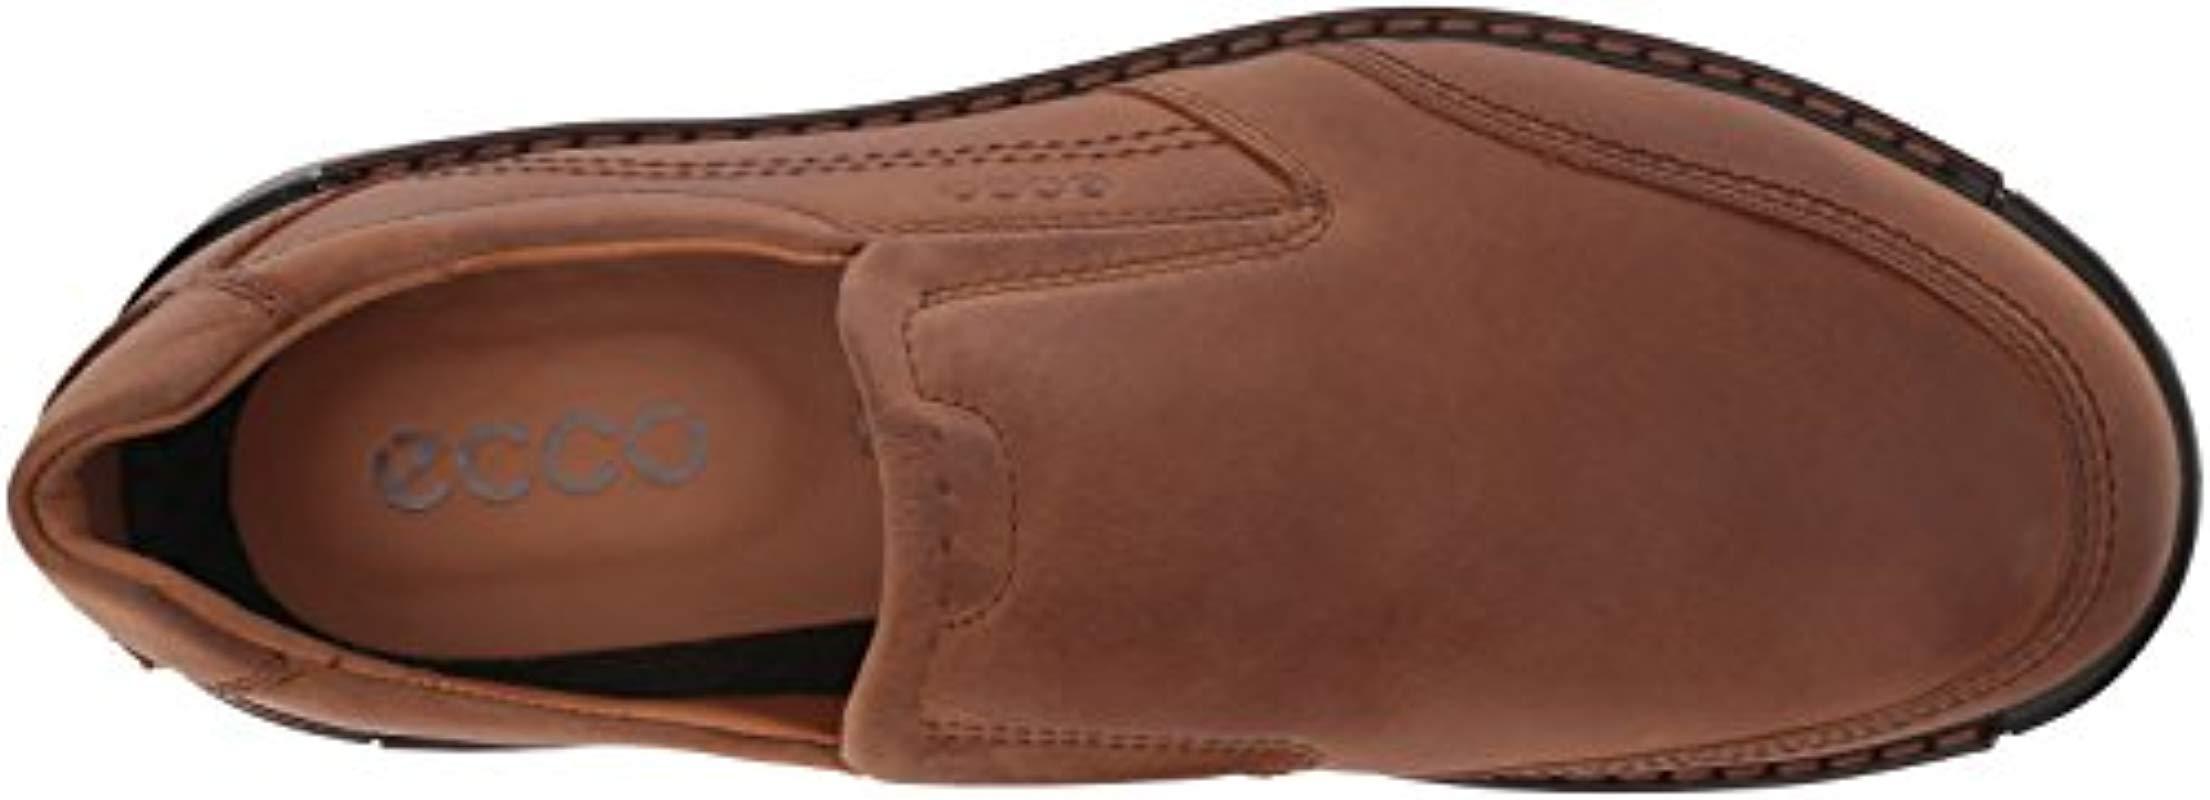 Ecco Fusion Ii On Slip-on Loafer in Brown for Men | Lyst